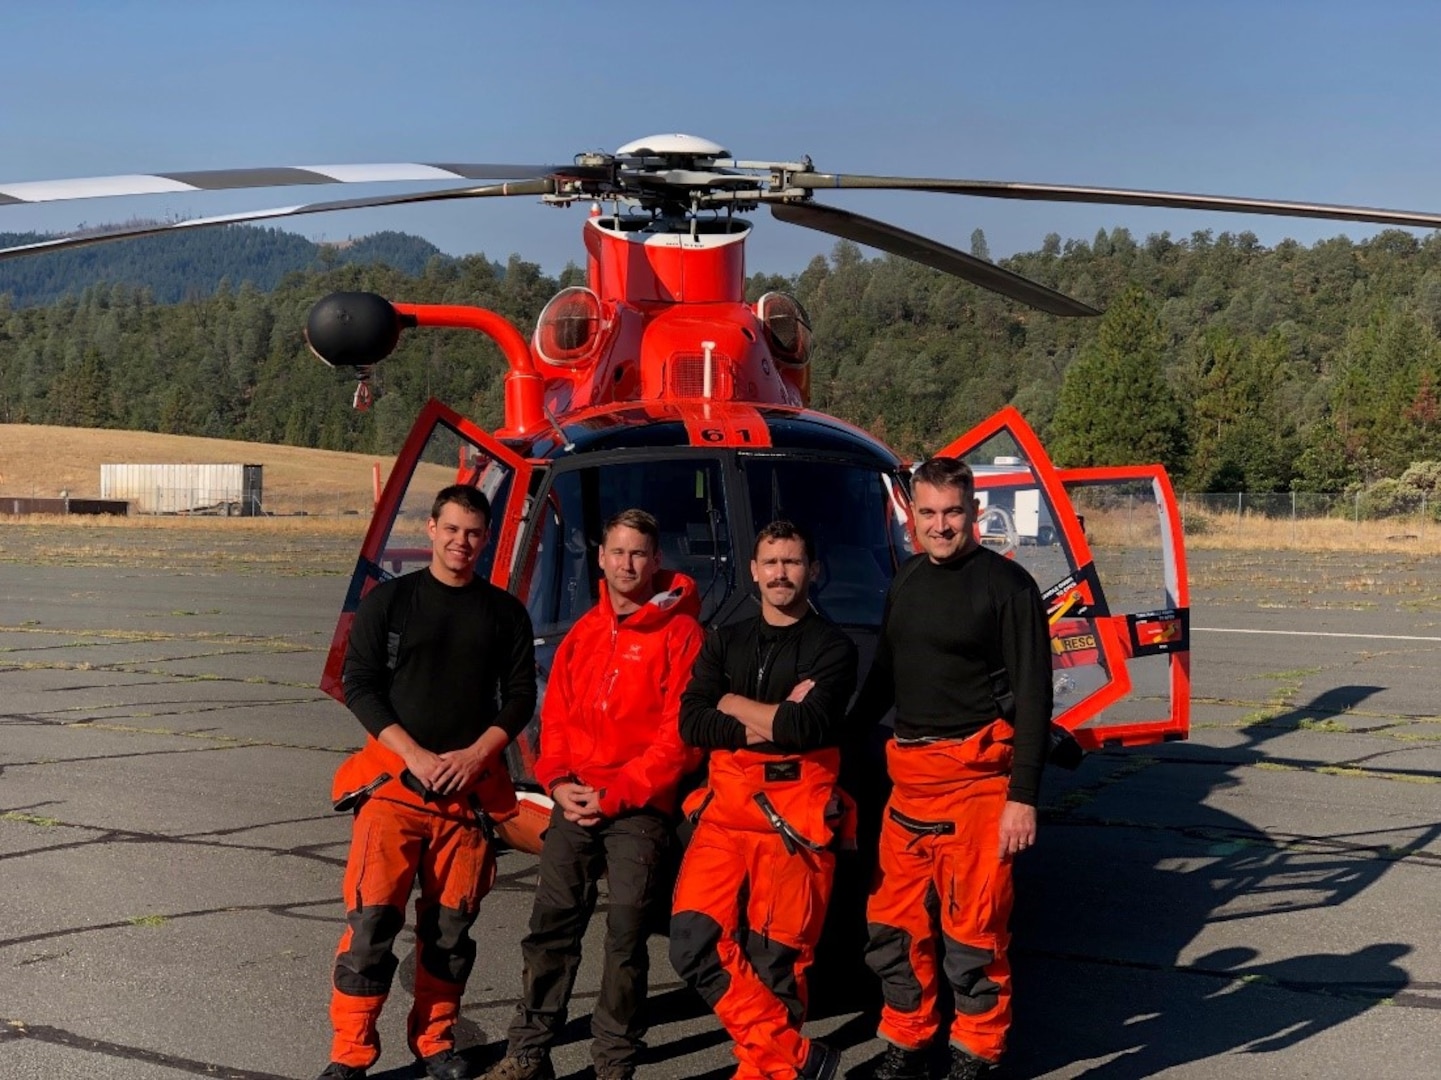 The crew of Coast Guard rescue helicopter from U.S. Coast Guard Sector Humboldt Bay following a daring night rescue of two firefighters who were seriously injured while battling the Middle Fire on the Shasta-Trinity National Forest in 2019. From left to right: Petty Officer 2nd Class Tyler Cook, flight mechanic; Petty Officer 1st Class Graham McGinnis, rescue swimmer; Lt. Adam Ownbey, co-pilot; Lt. Cmdr. Derek Schramel, aircraft commander. (U.S. Coast Guard photo)